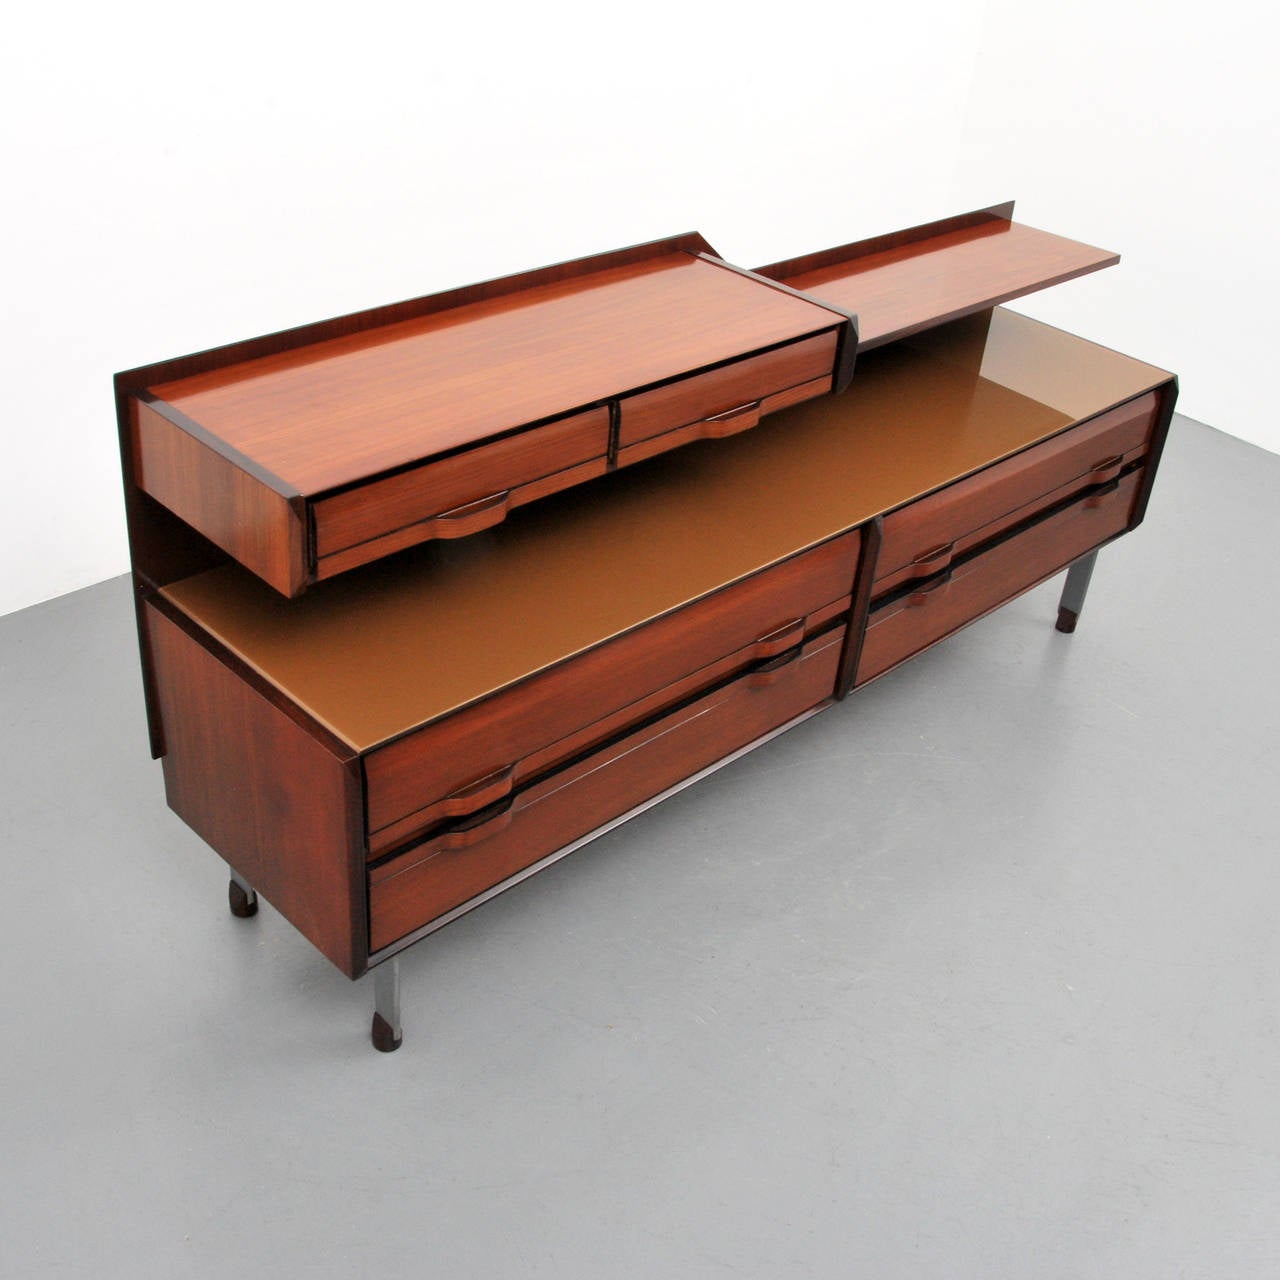 Cabinet has an upper tier with two drawers and a shelf. The lower tier has a glass top over four drawers, raised on short steel legs with wooden feet.